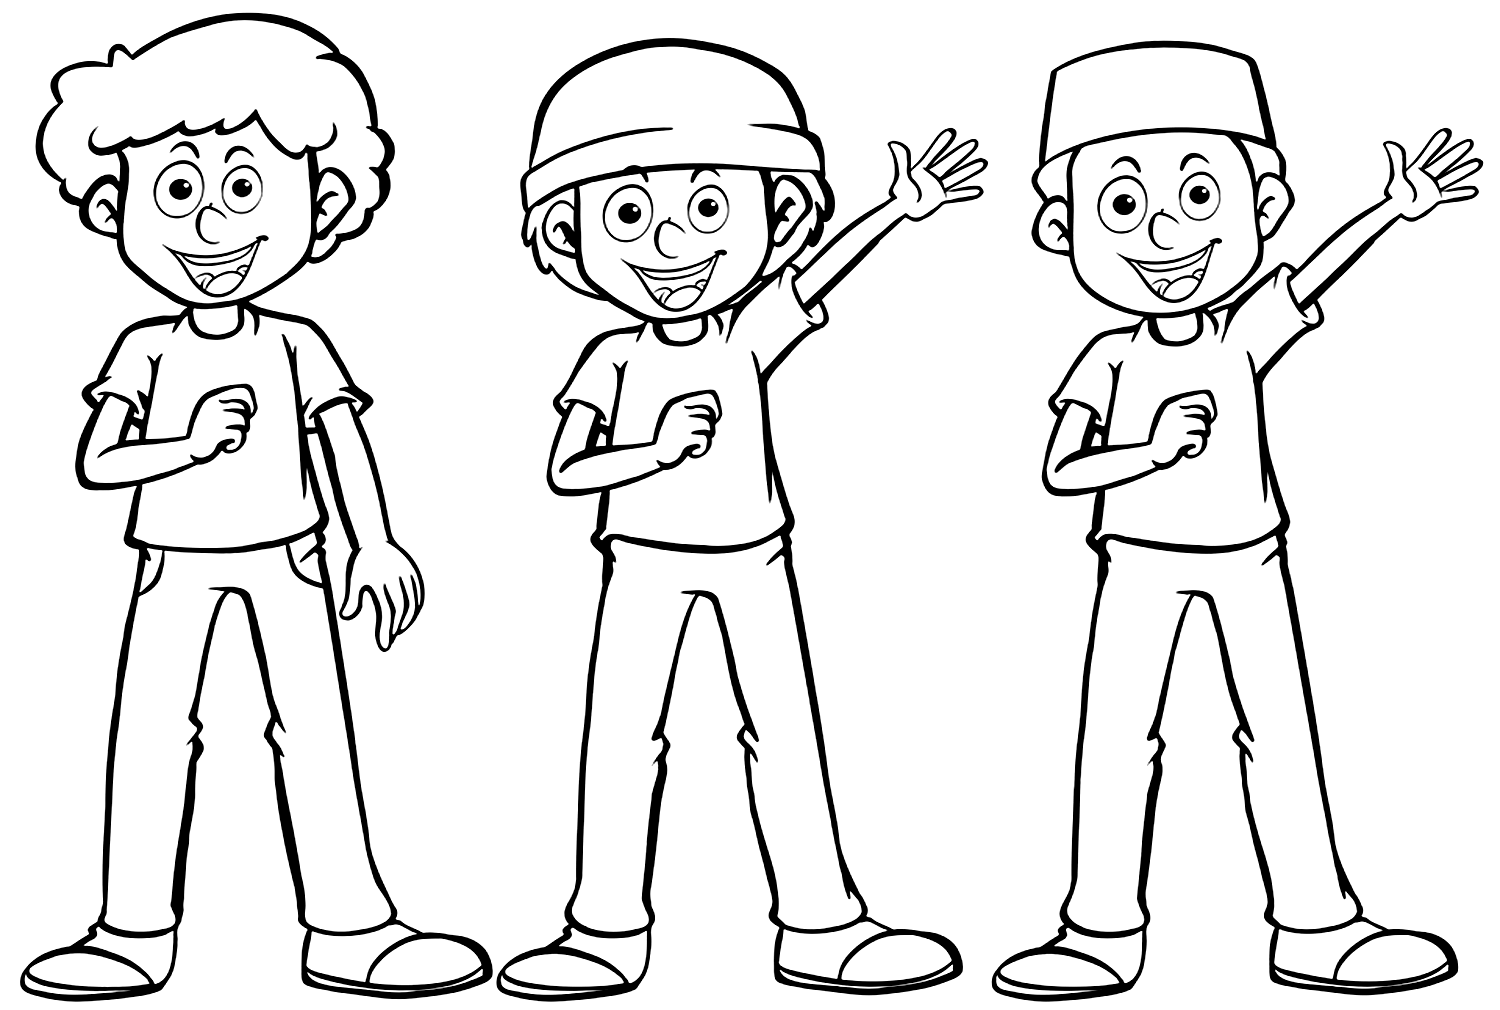 Printable Youth Day Coloring Pages from International Youth Day